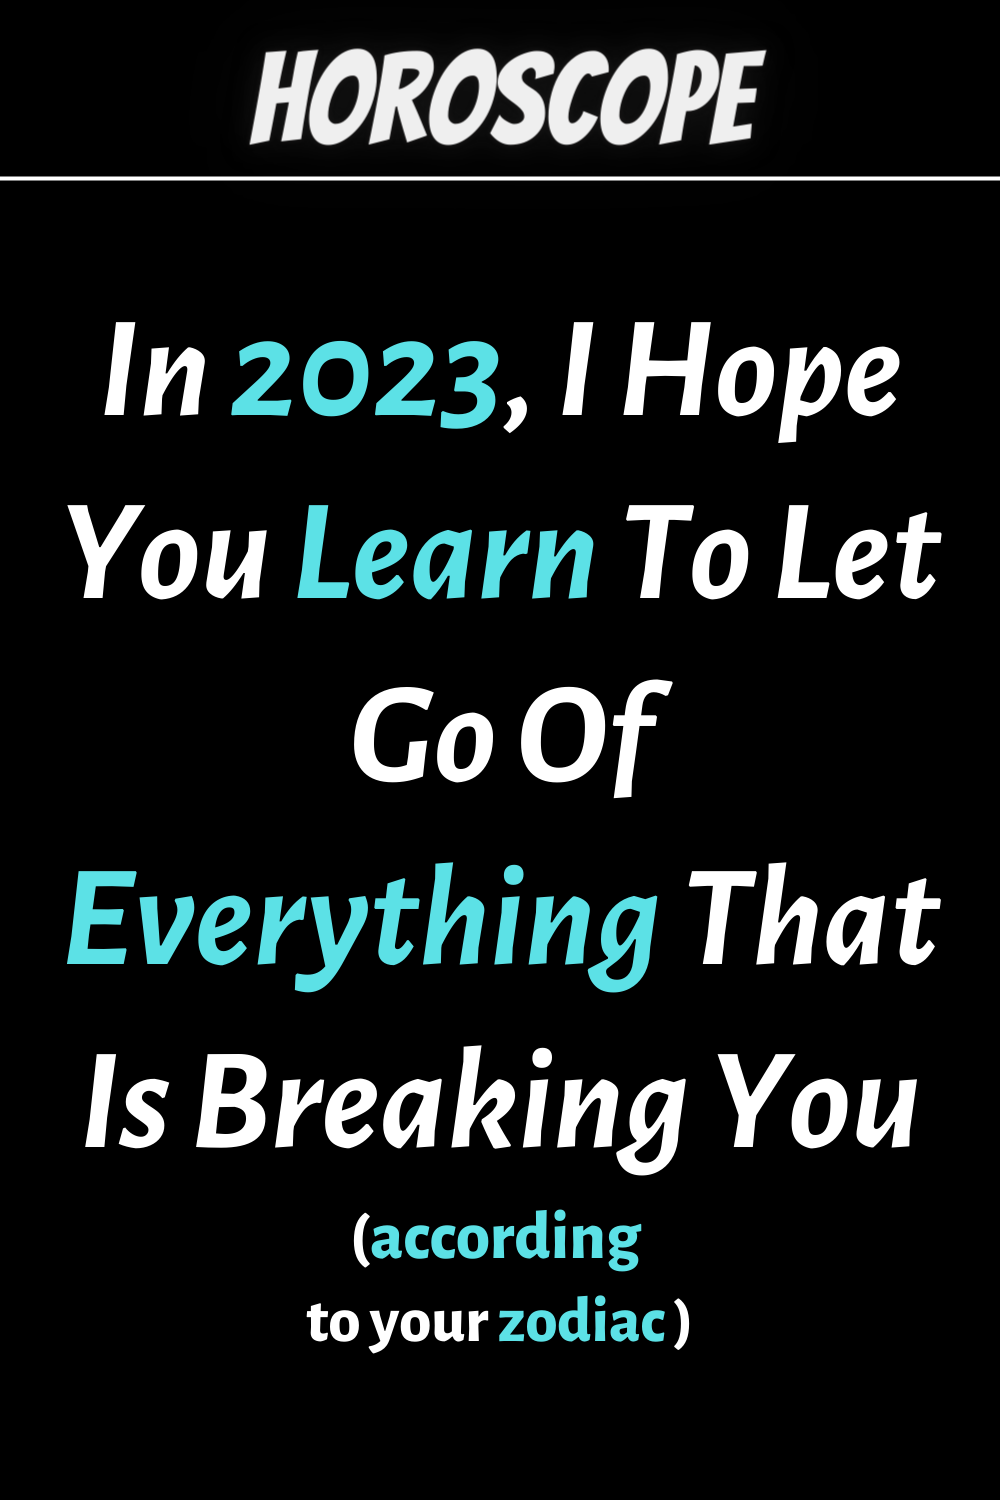 In 2023, I Hope You Learn To Let Go Of Everything That Is Breaking You